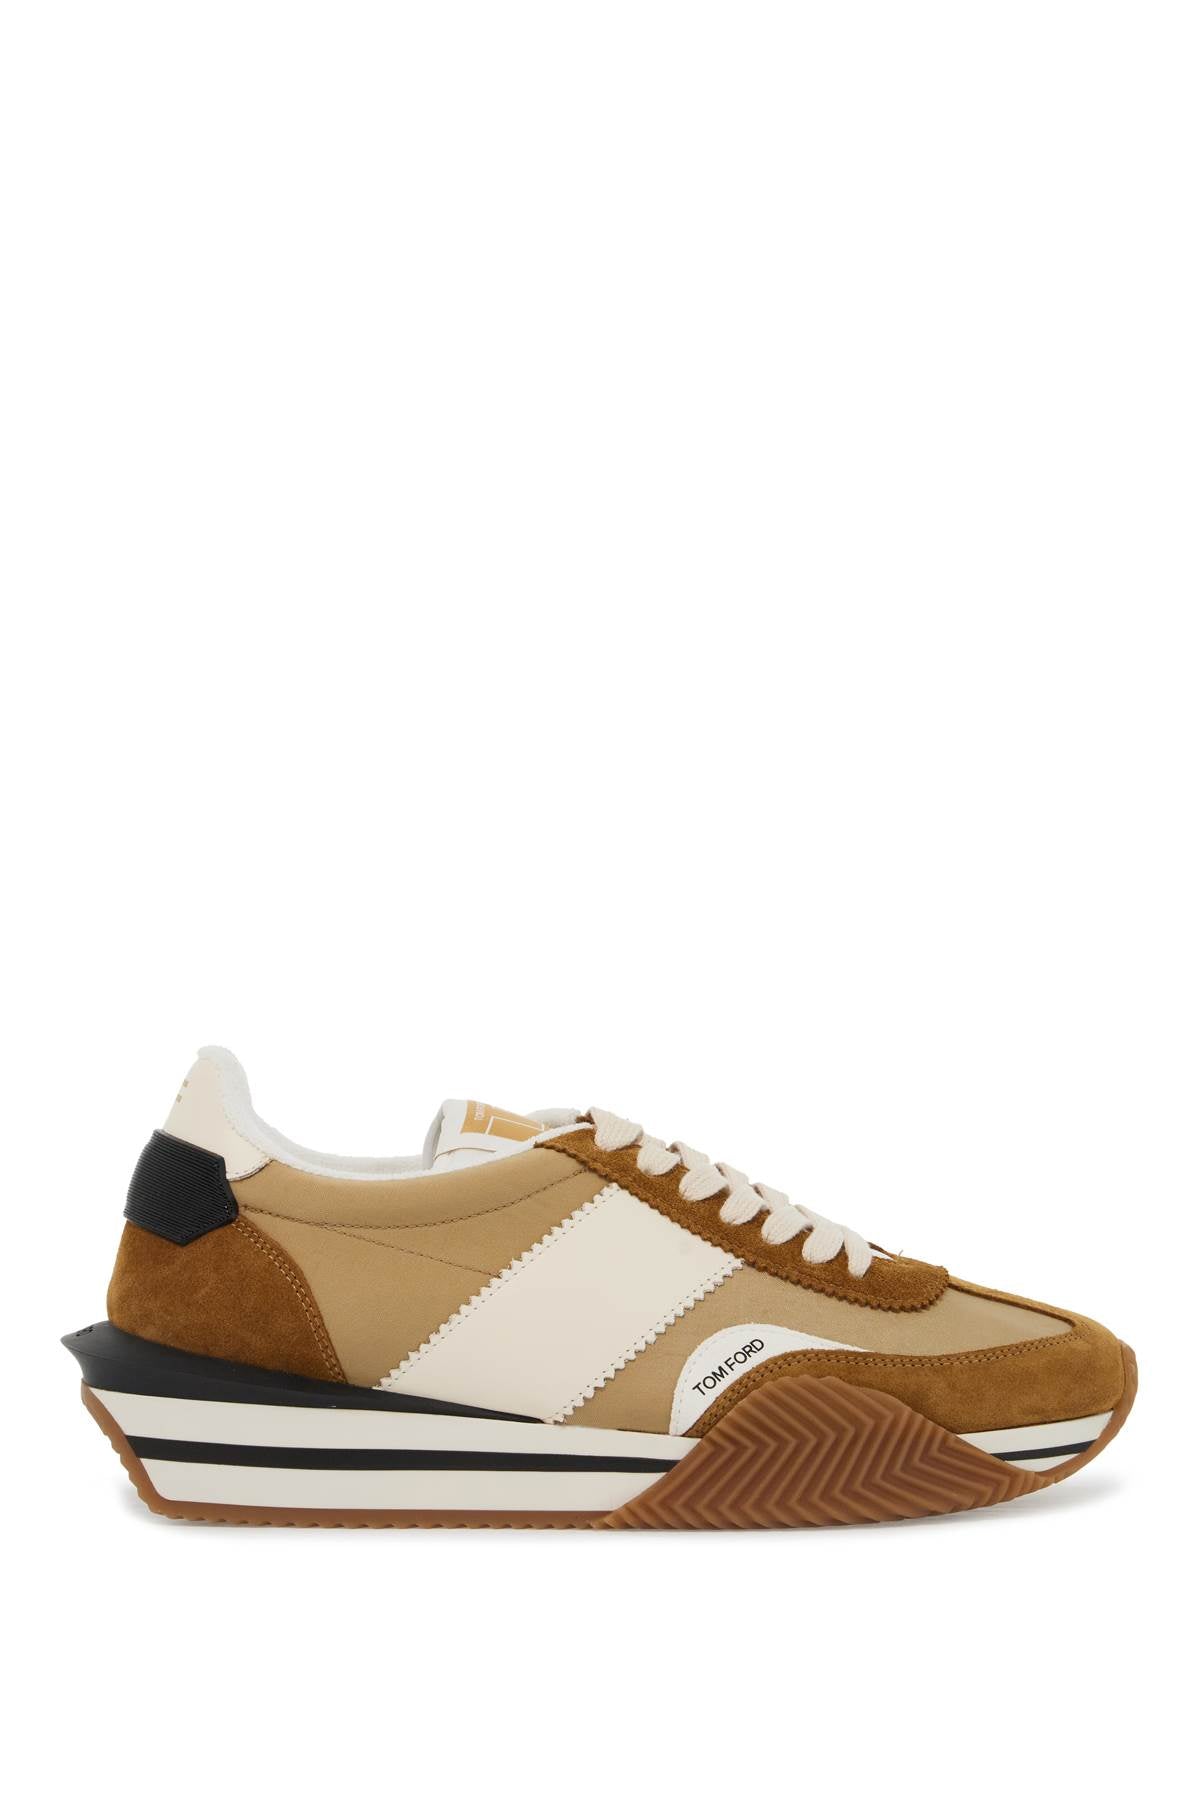 TOM FORD TECHNO CANVAS AND SUEDE 'JAMES' Sneaker